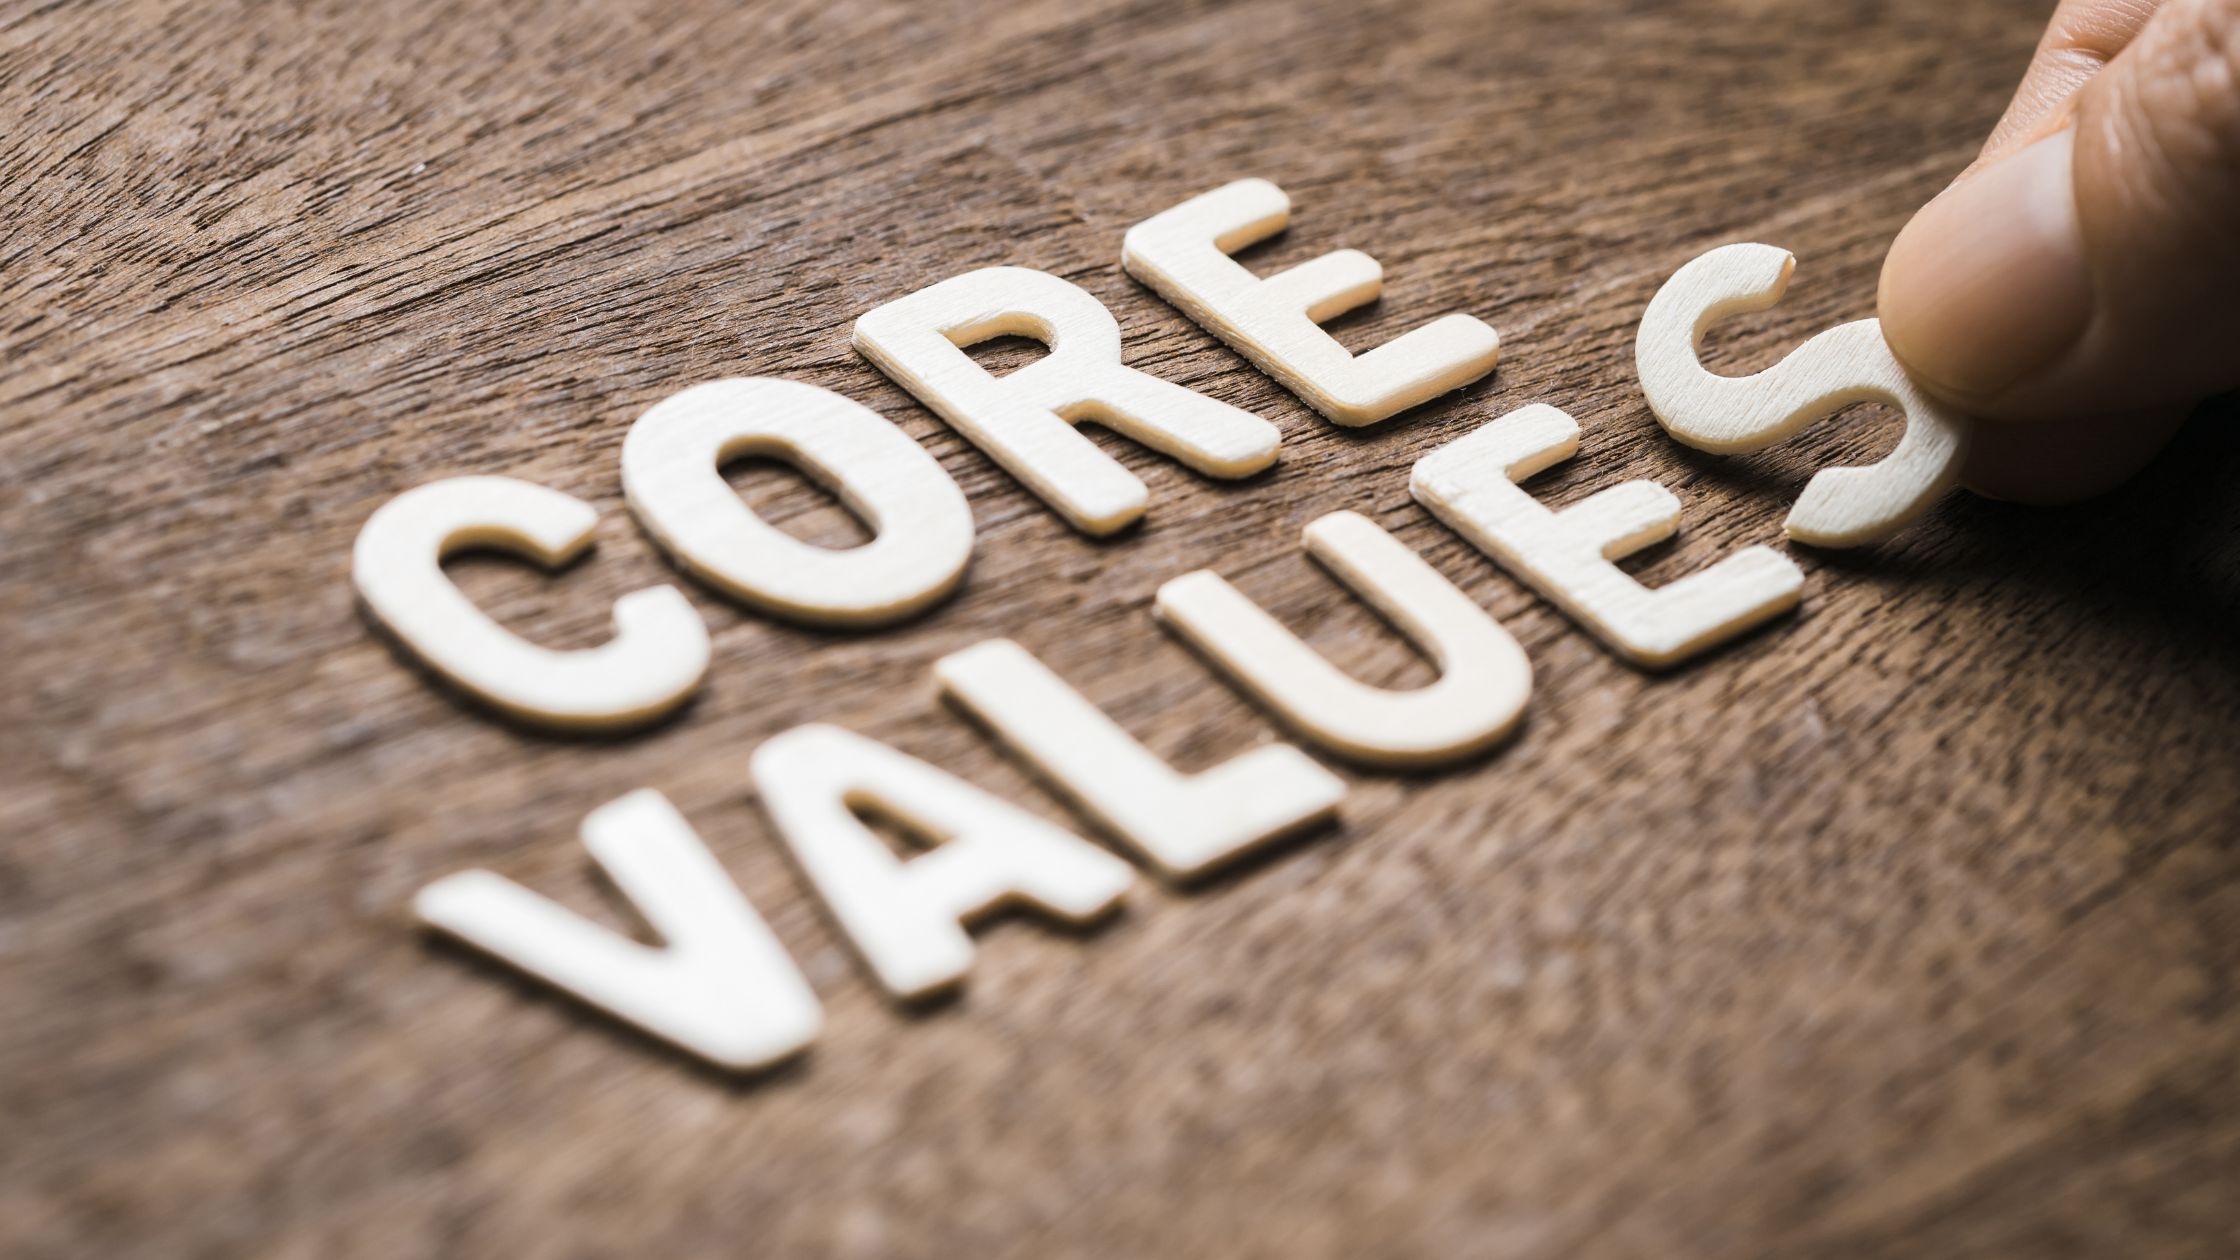 Get Up Close and Personal With Your Core Values